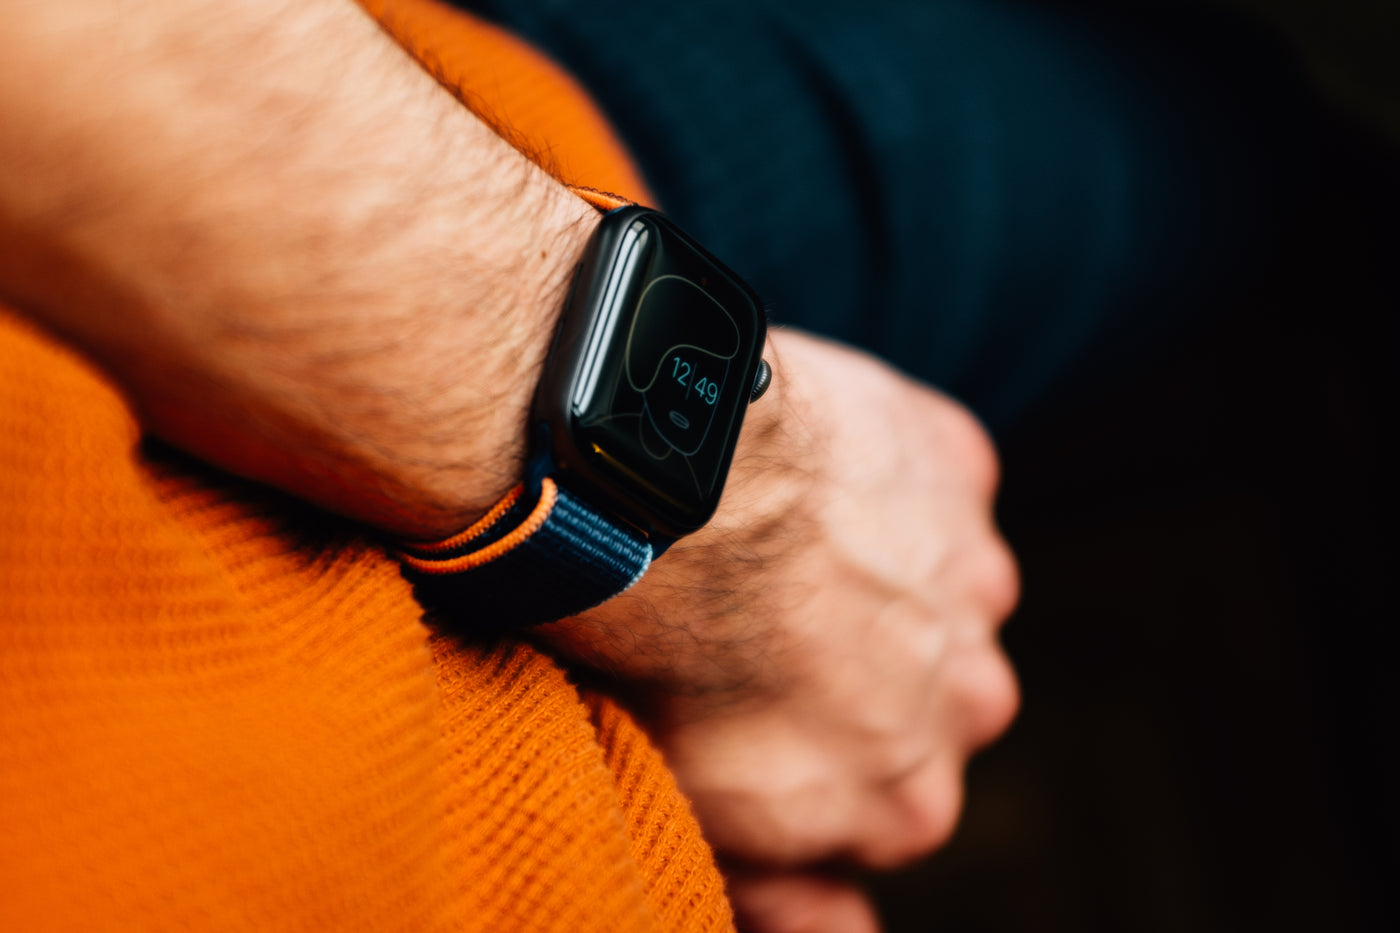 close-up-of-a-person-arm-wearing-a-smartwatch - eShop Now